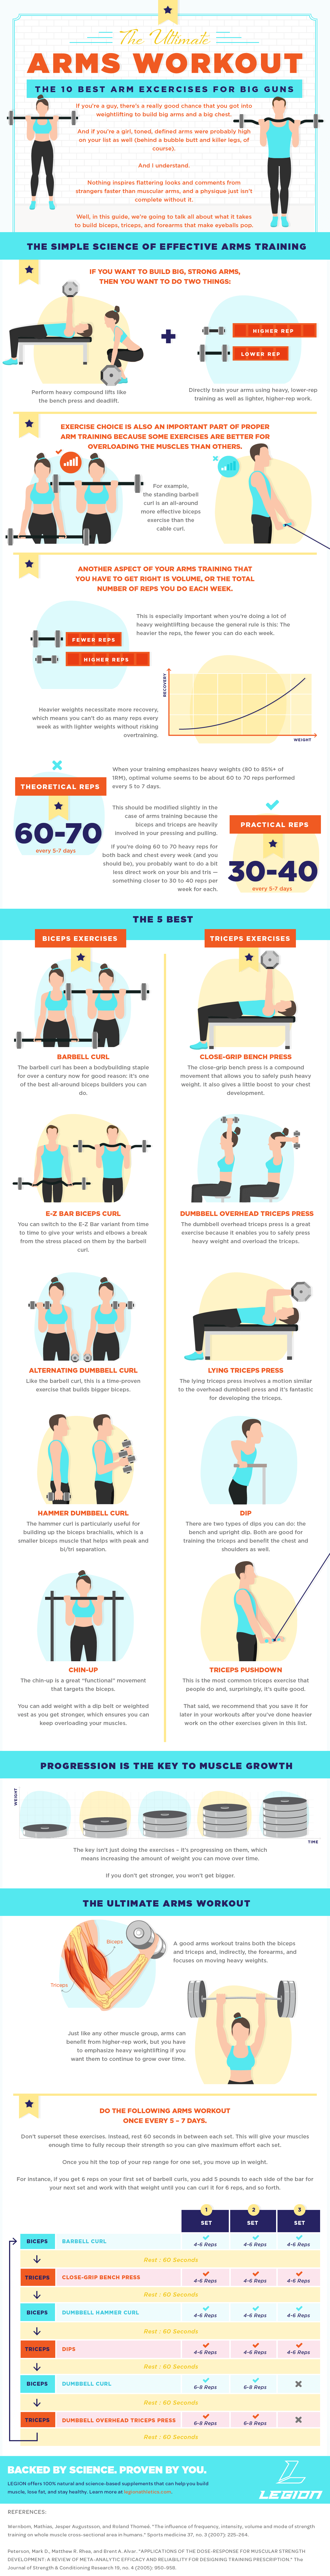 best-arms-workout-infographic.png